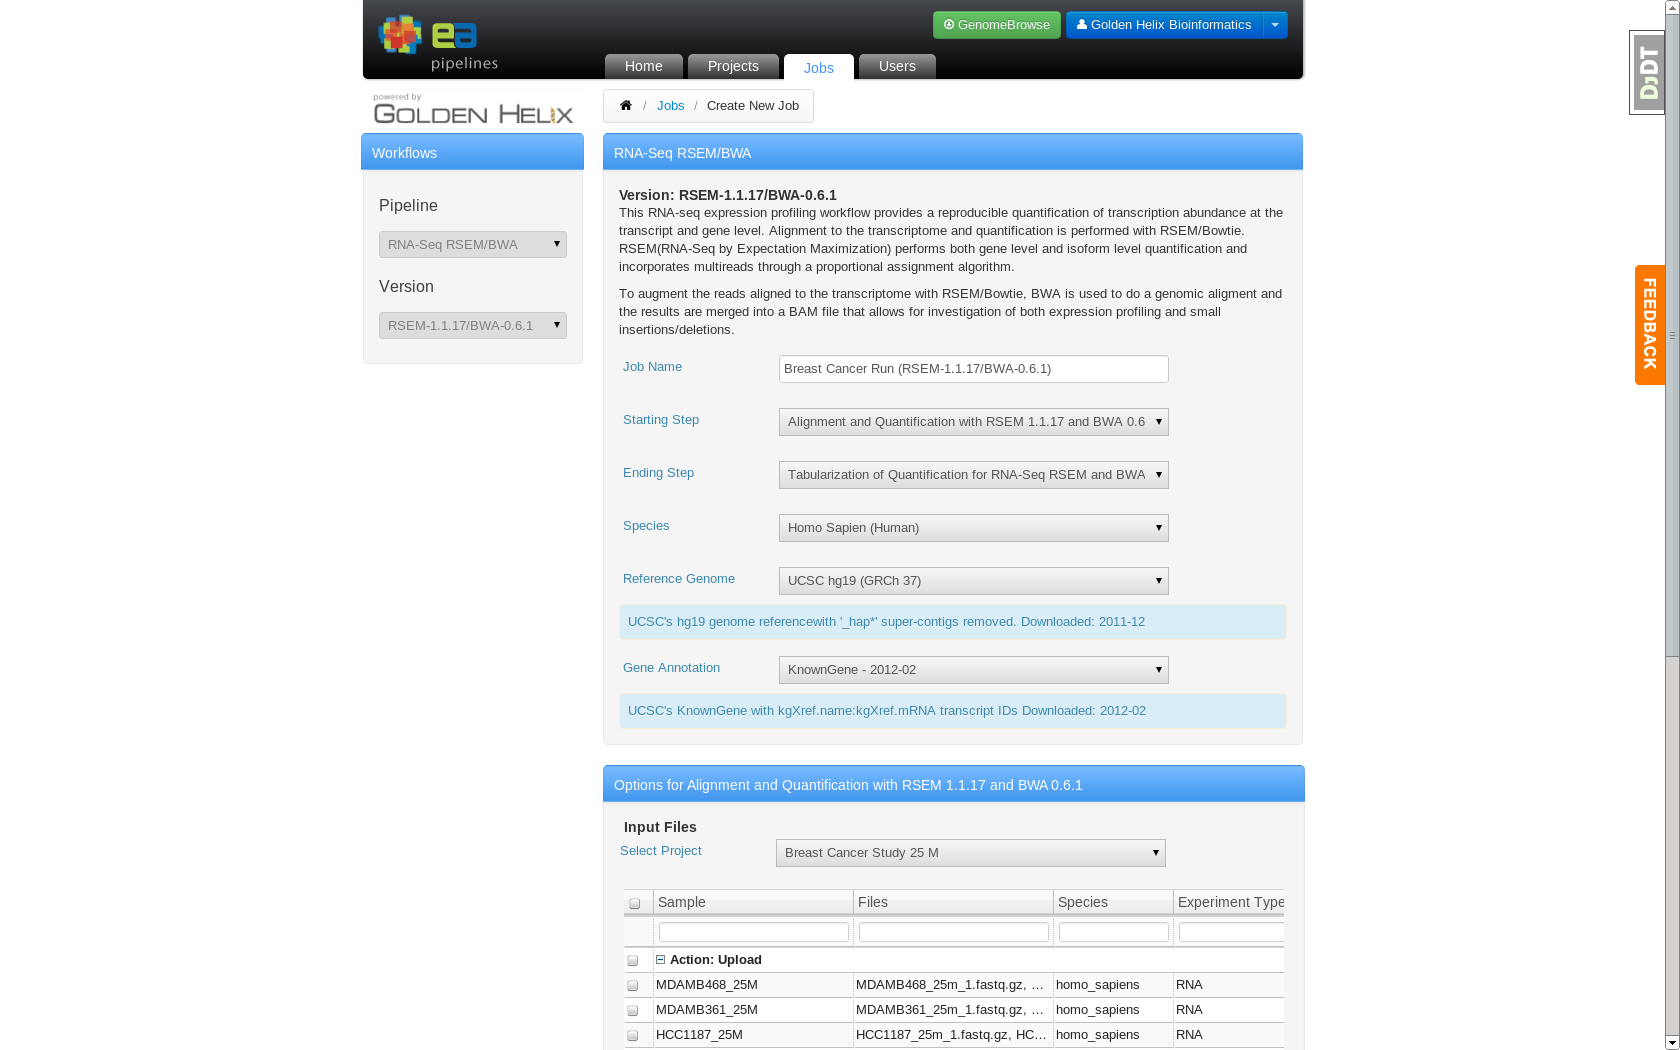 Job Creation page which allows users to specify analysis settings